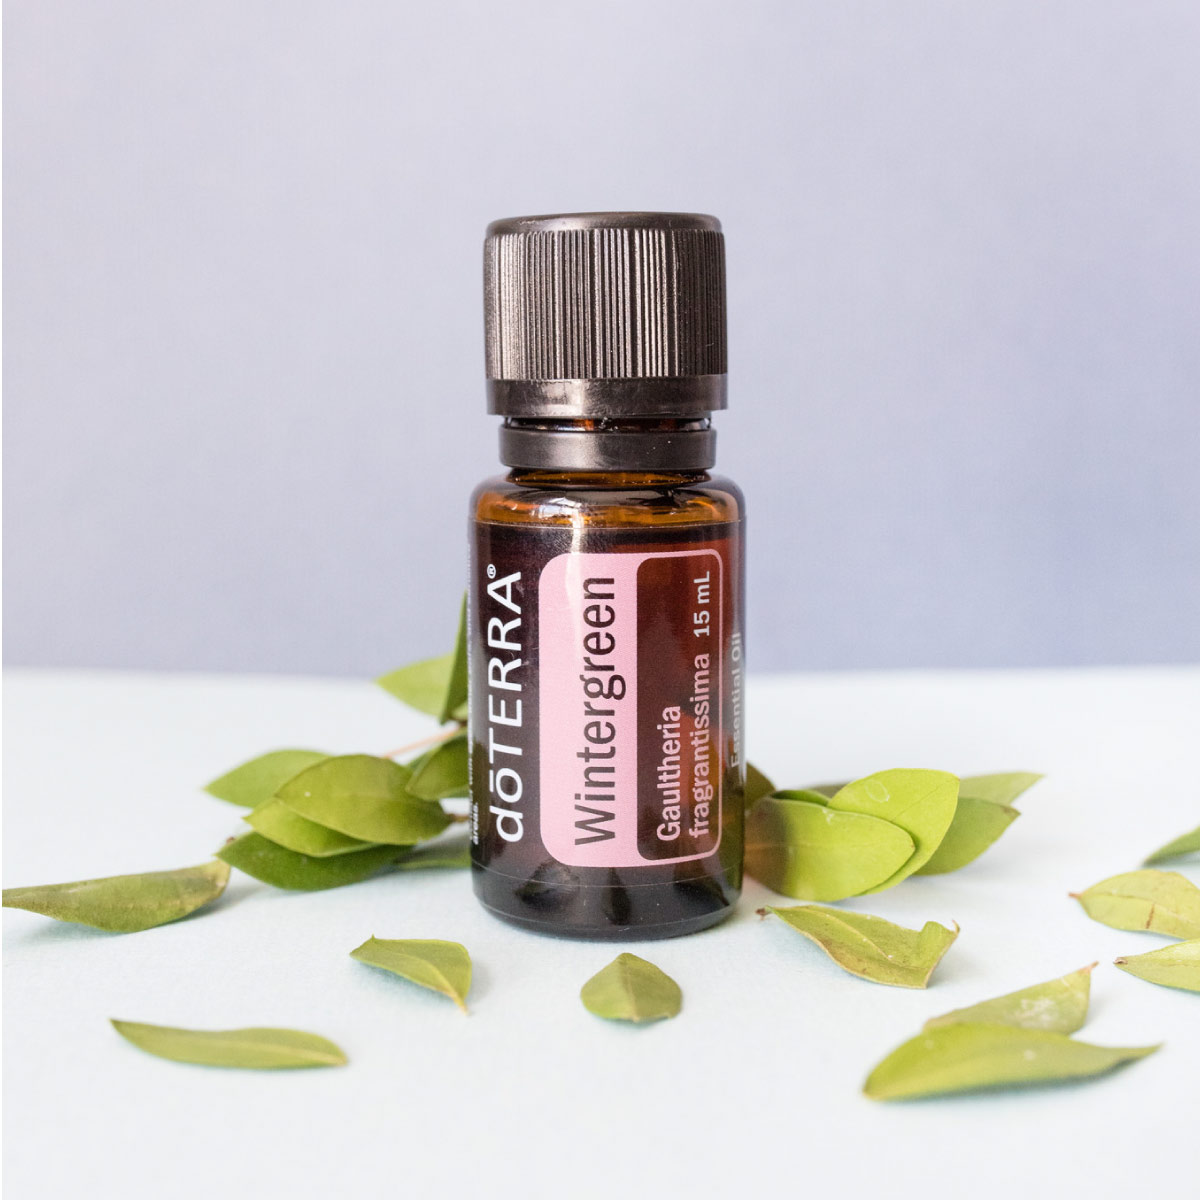 Bottle of Wintergreen essential oil surrounded by green leaves. What are the benefits of Wintergreen oil? Wintergreen oil has benefits for massage, and is useful for creating an uplifting environment.